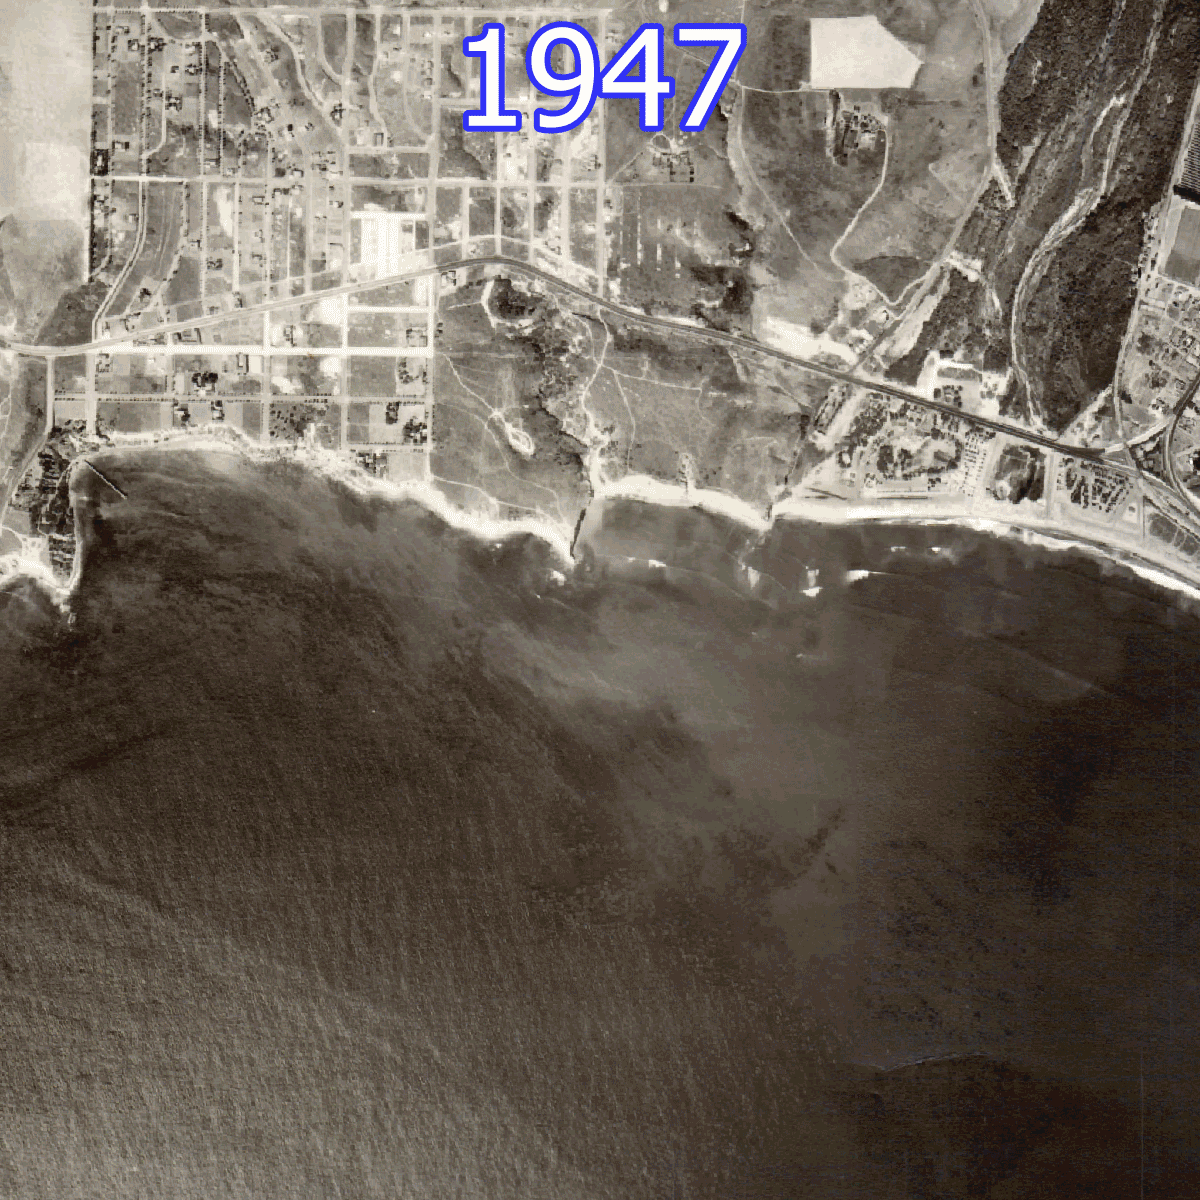 GIF of a beach changing over time